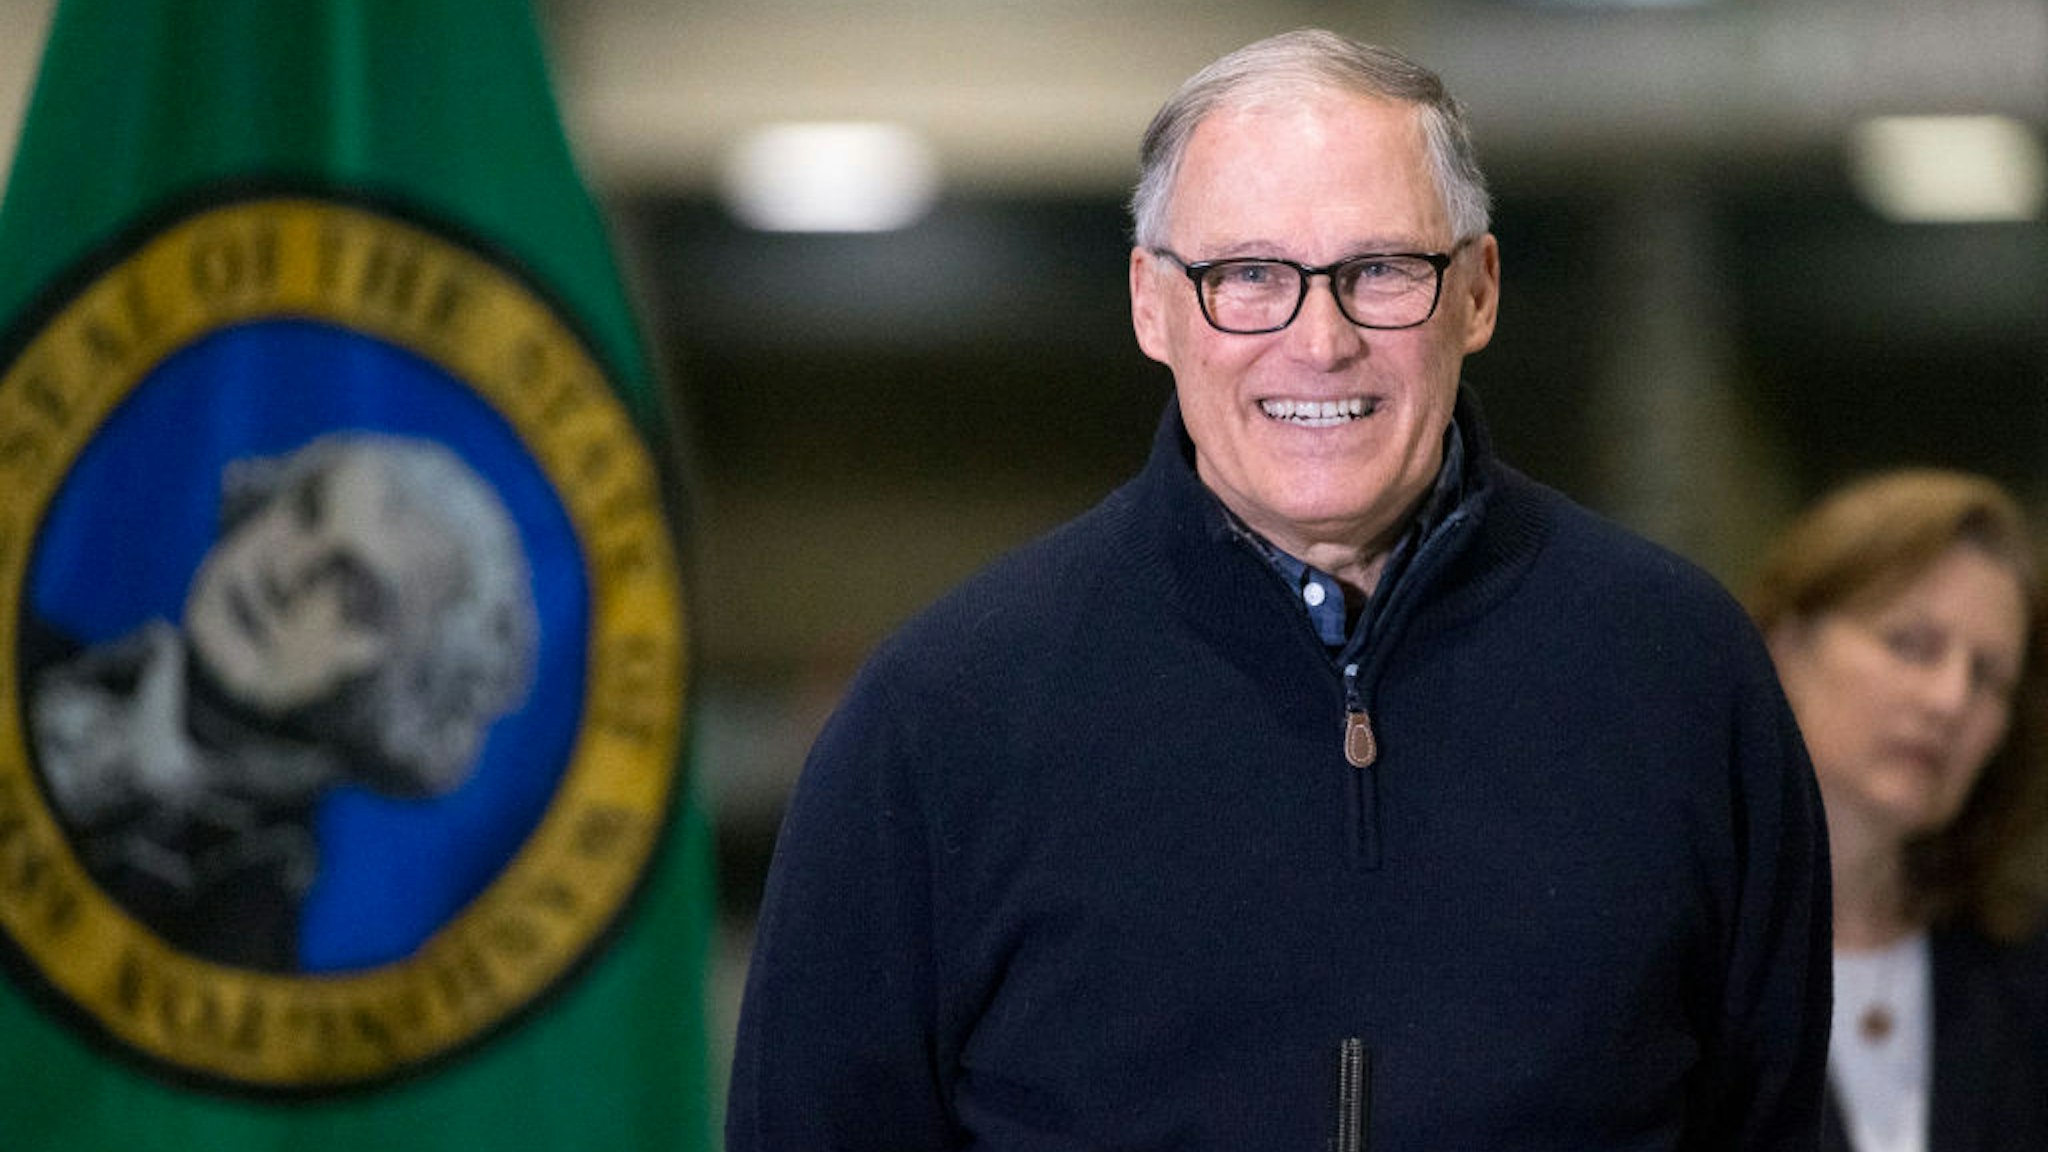 Washington State Governor Jay Inslee and other leaders speak to the press on March 28, 2020 in Seattle, Washington.